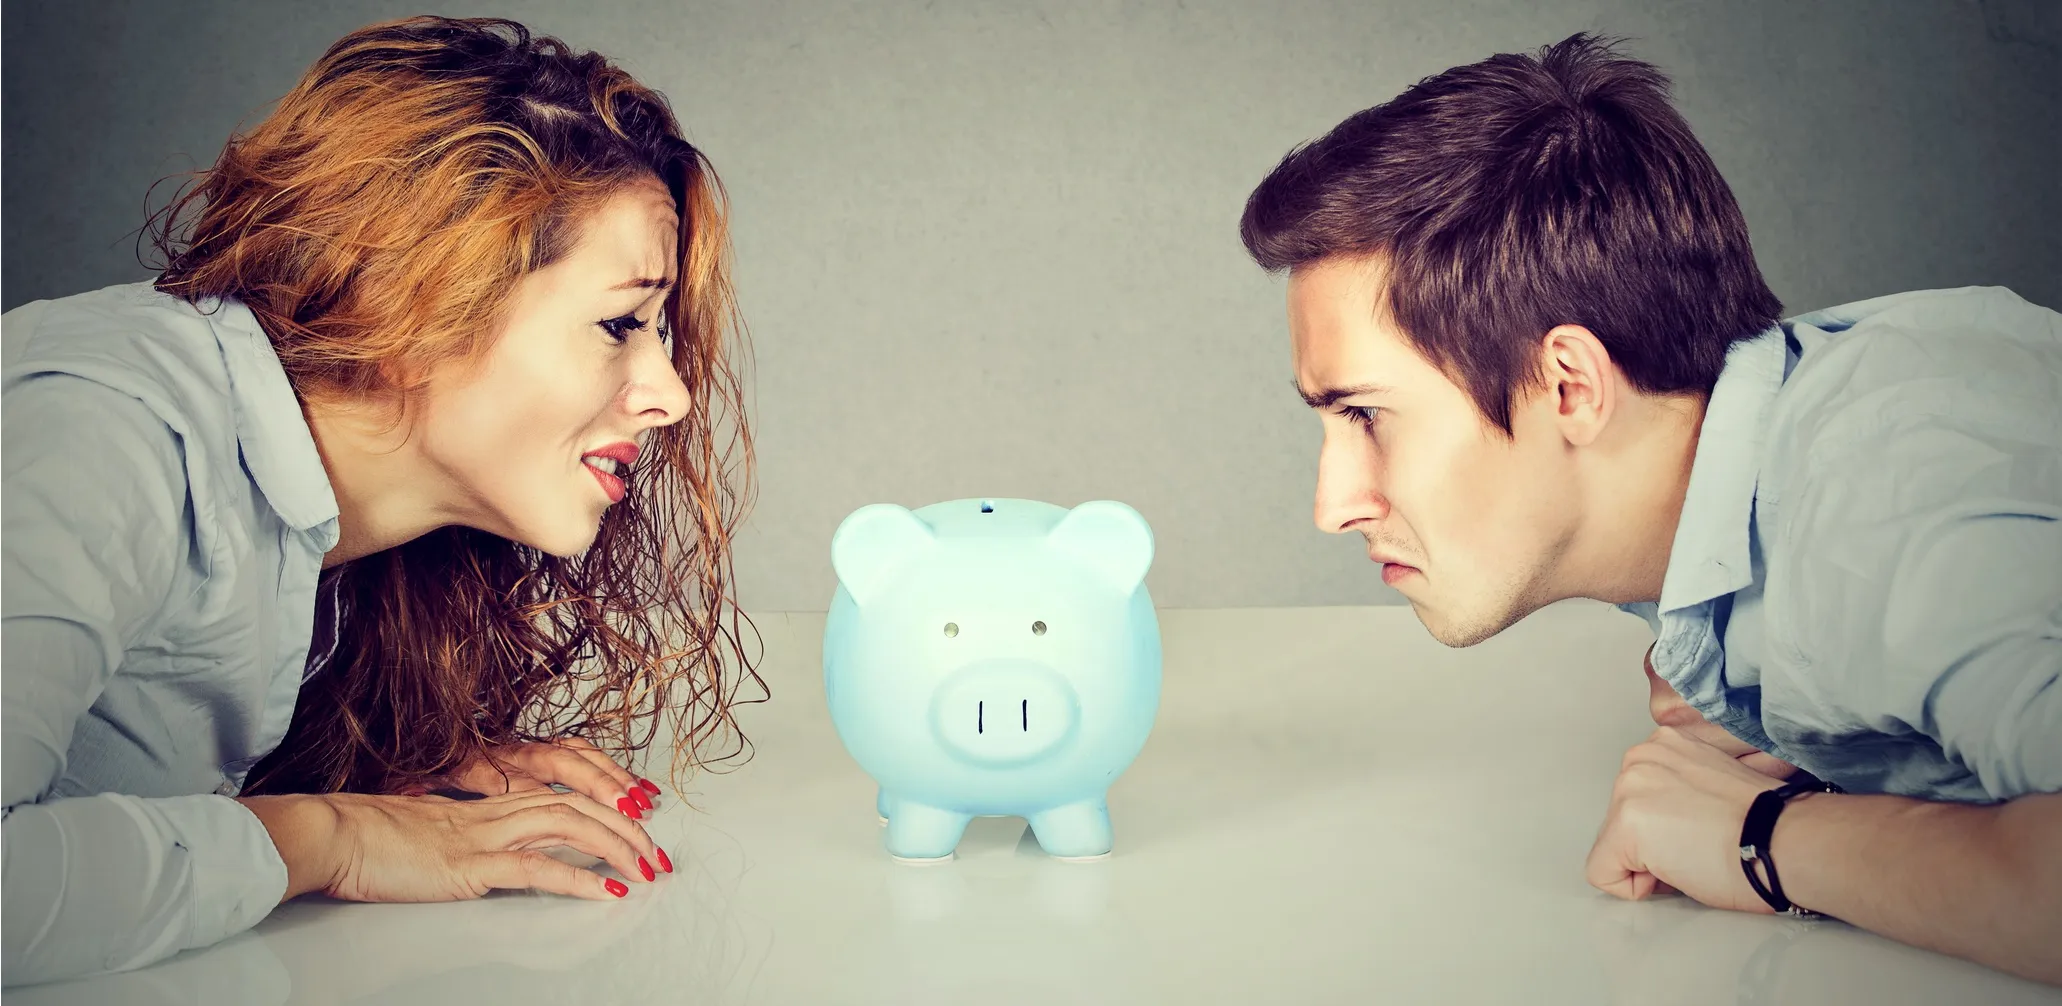 Divorcing couple sorting out their finances